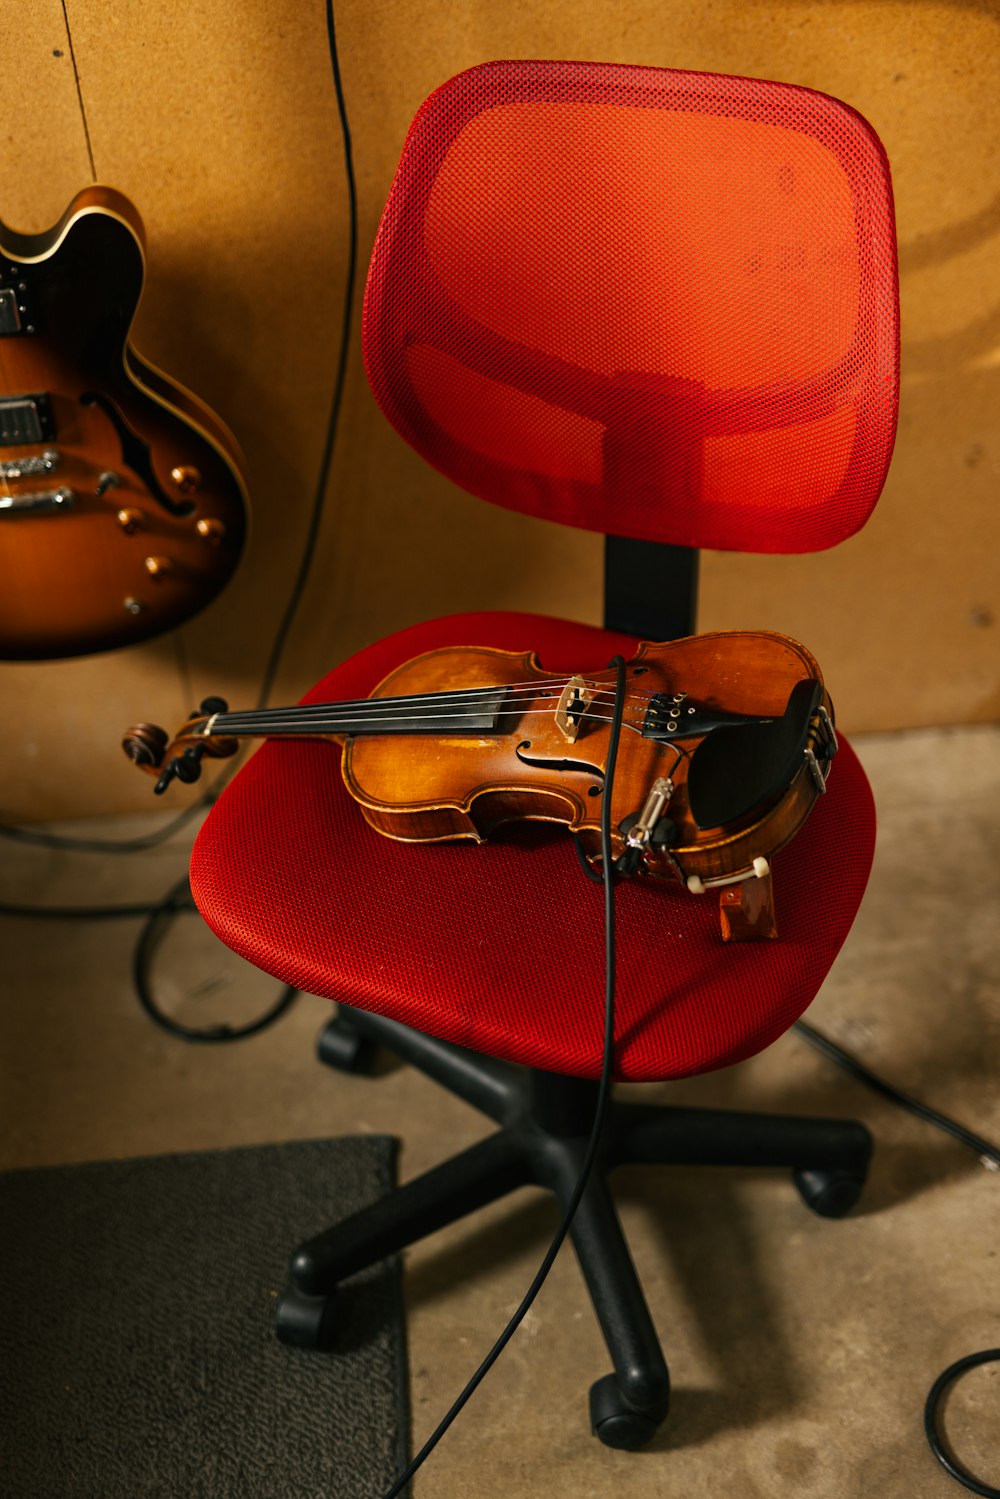 a violin on a stand